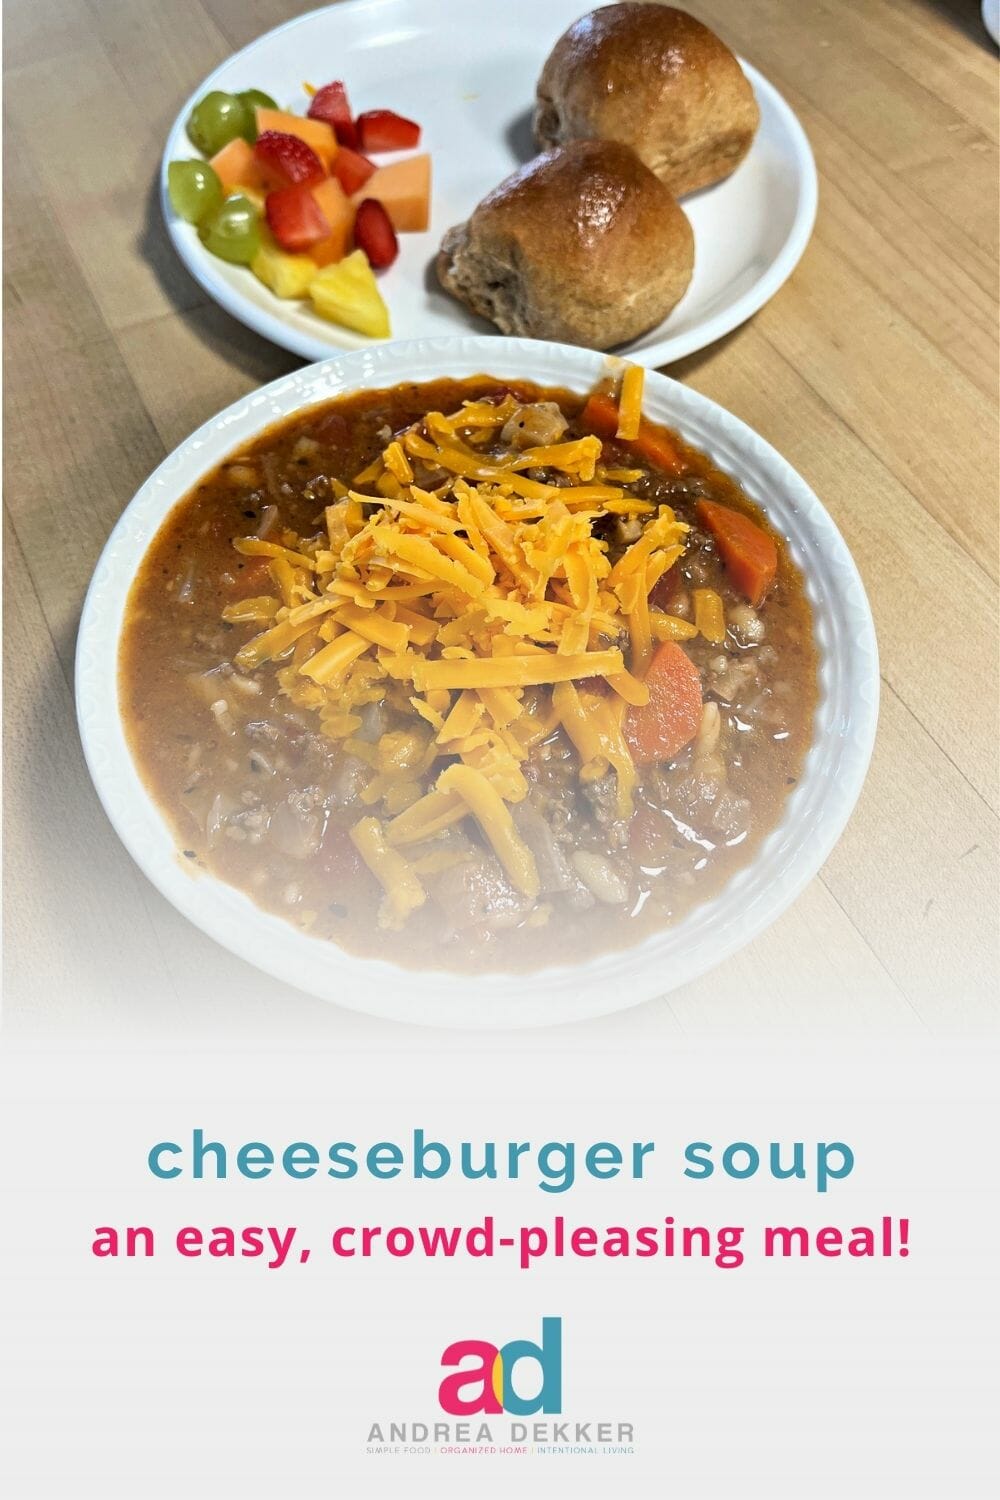 Cheeseburger soup is quick, easy, and versatile. It freezes well, it reheats well as leftovers, and... it's delicious! via @andreadekker